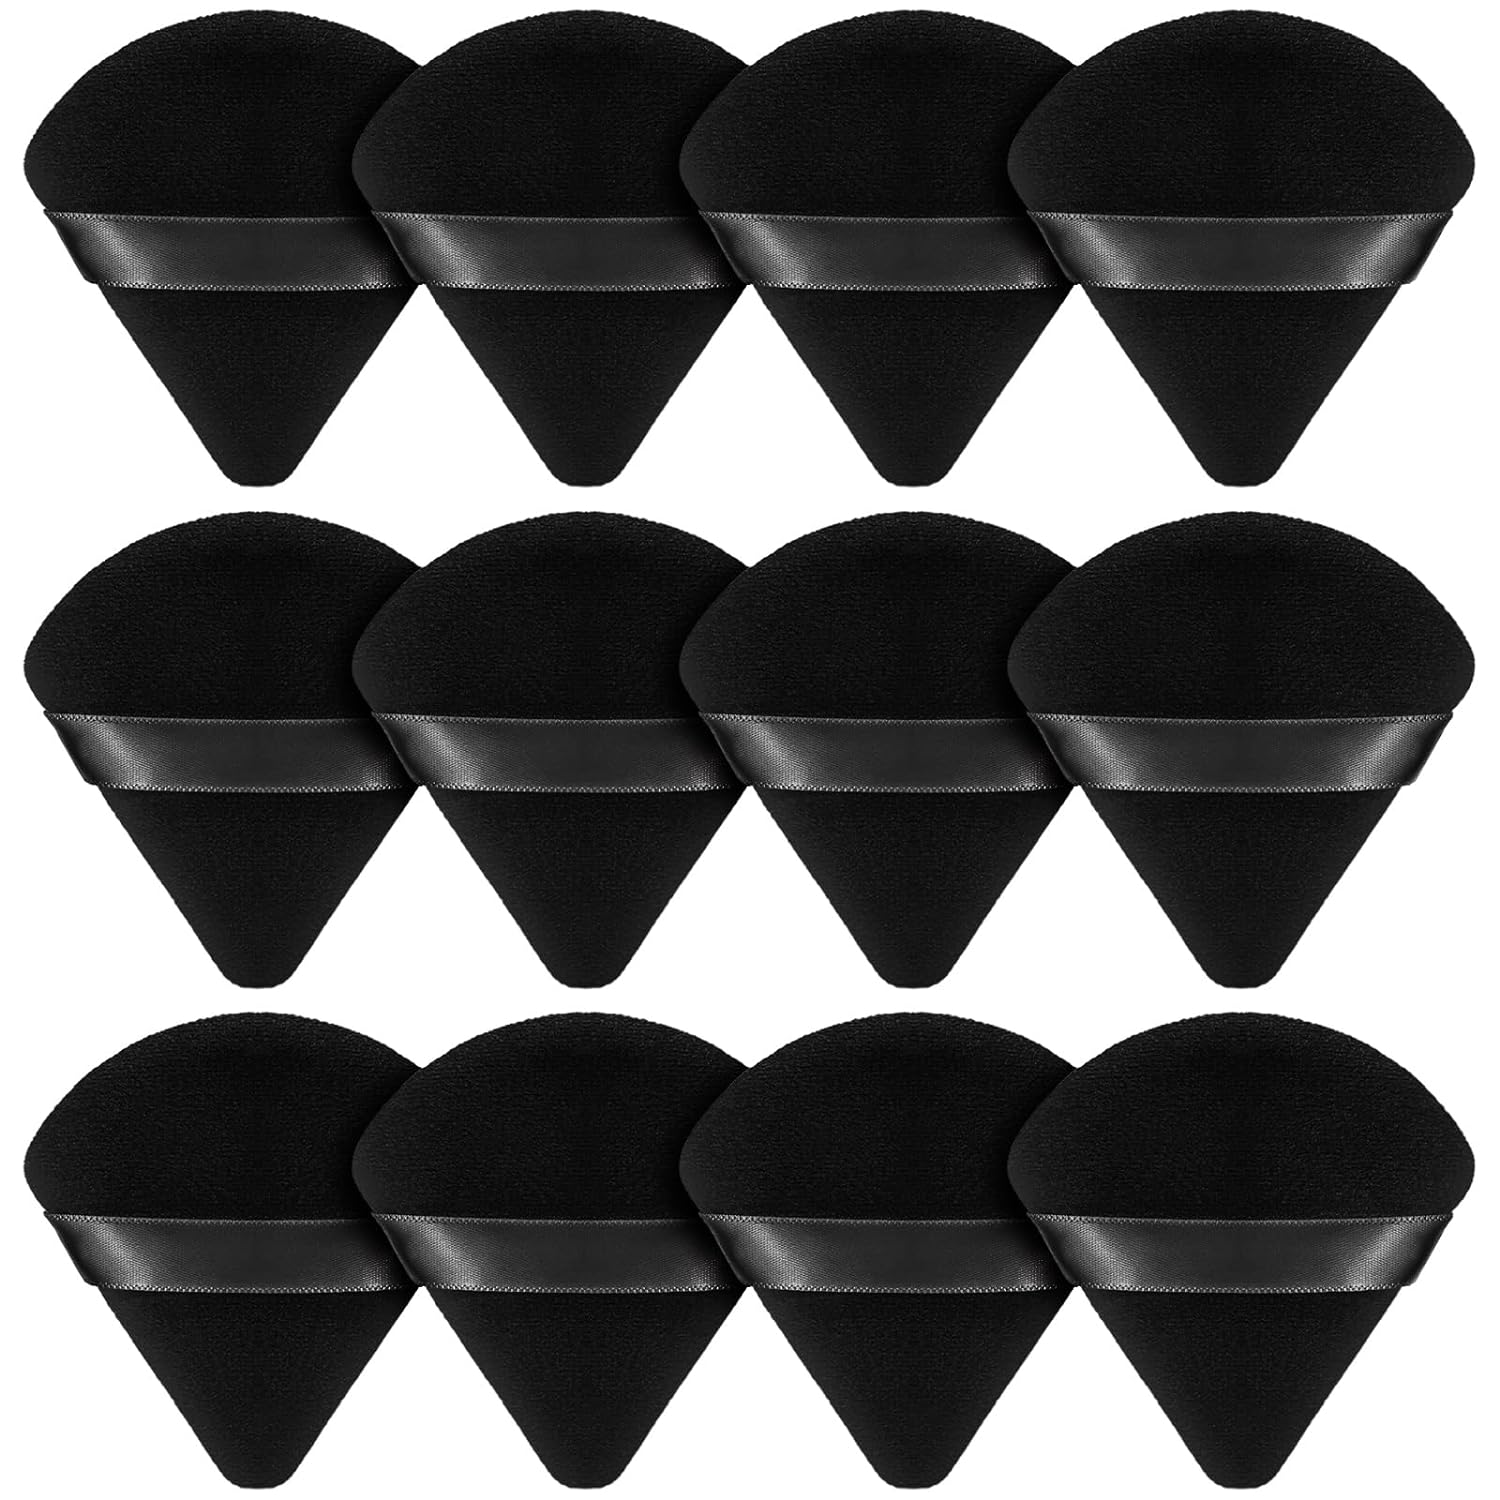 BEAKEY 12pcs Powder Puffs for Face Powder Triangle Powder Puff for Loose & Cosmetic Foundation, Makeup Puff for Contouring, Cloud Kiss Makeup Sponges Beauty Makeup Tools, Double 6 Pack Black - BEAKEY